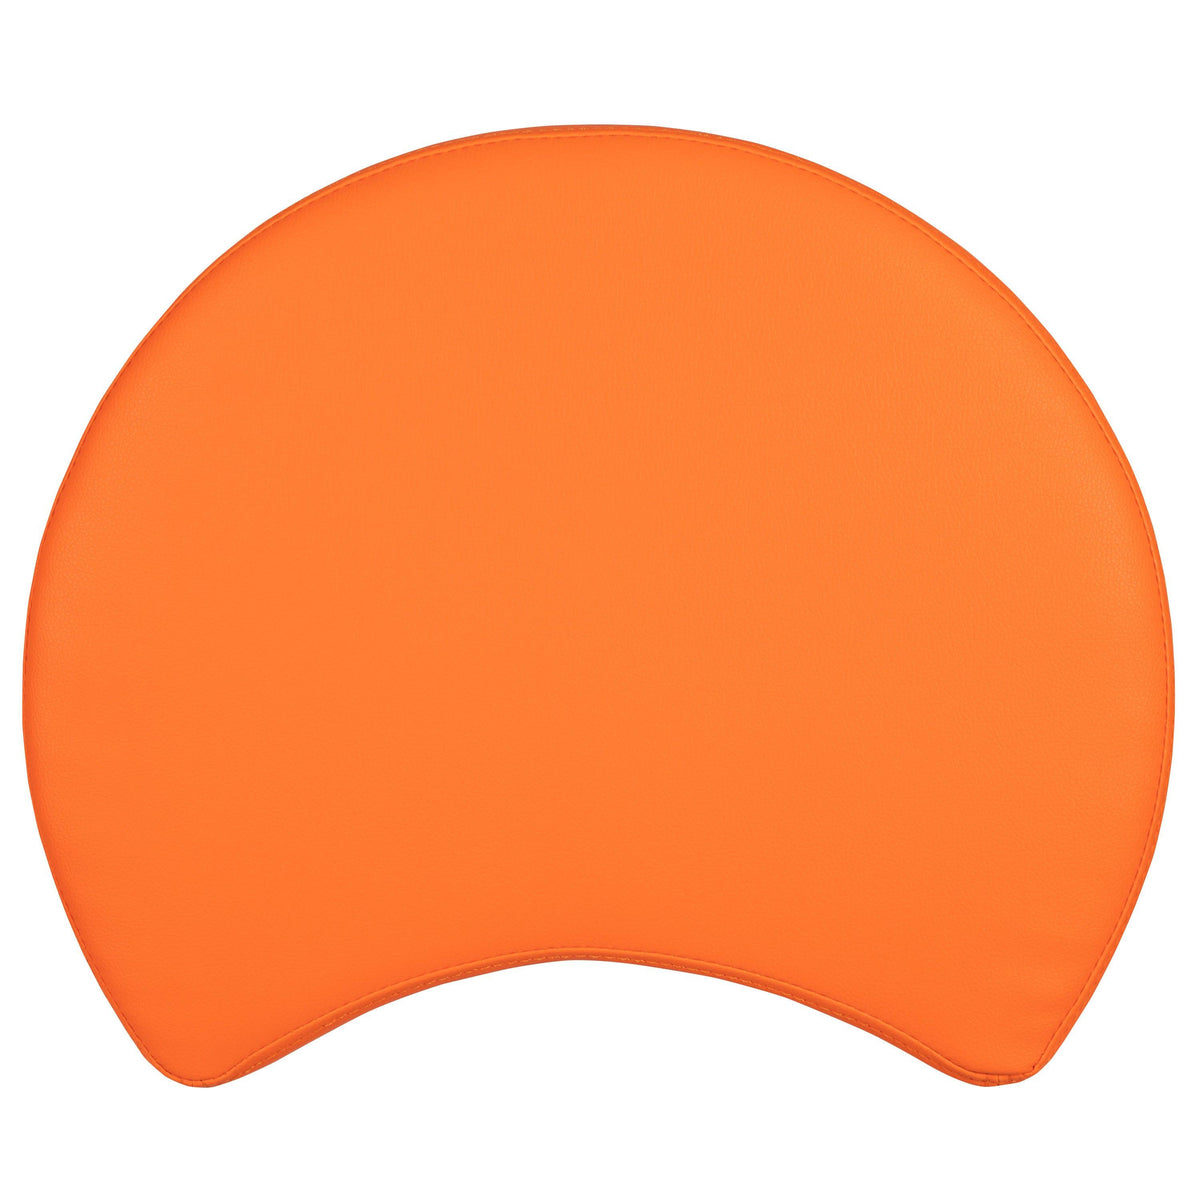 Orange |#| 18inchH Soft Seating Flexible Moon for Classrooms and Common Spaces - Orange